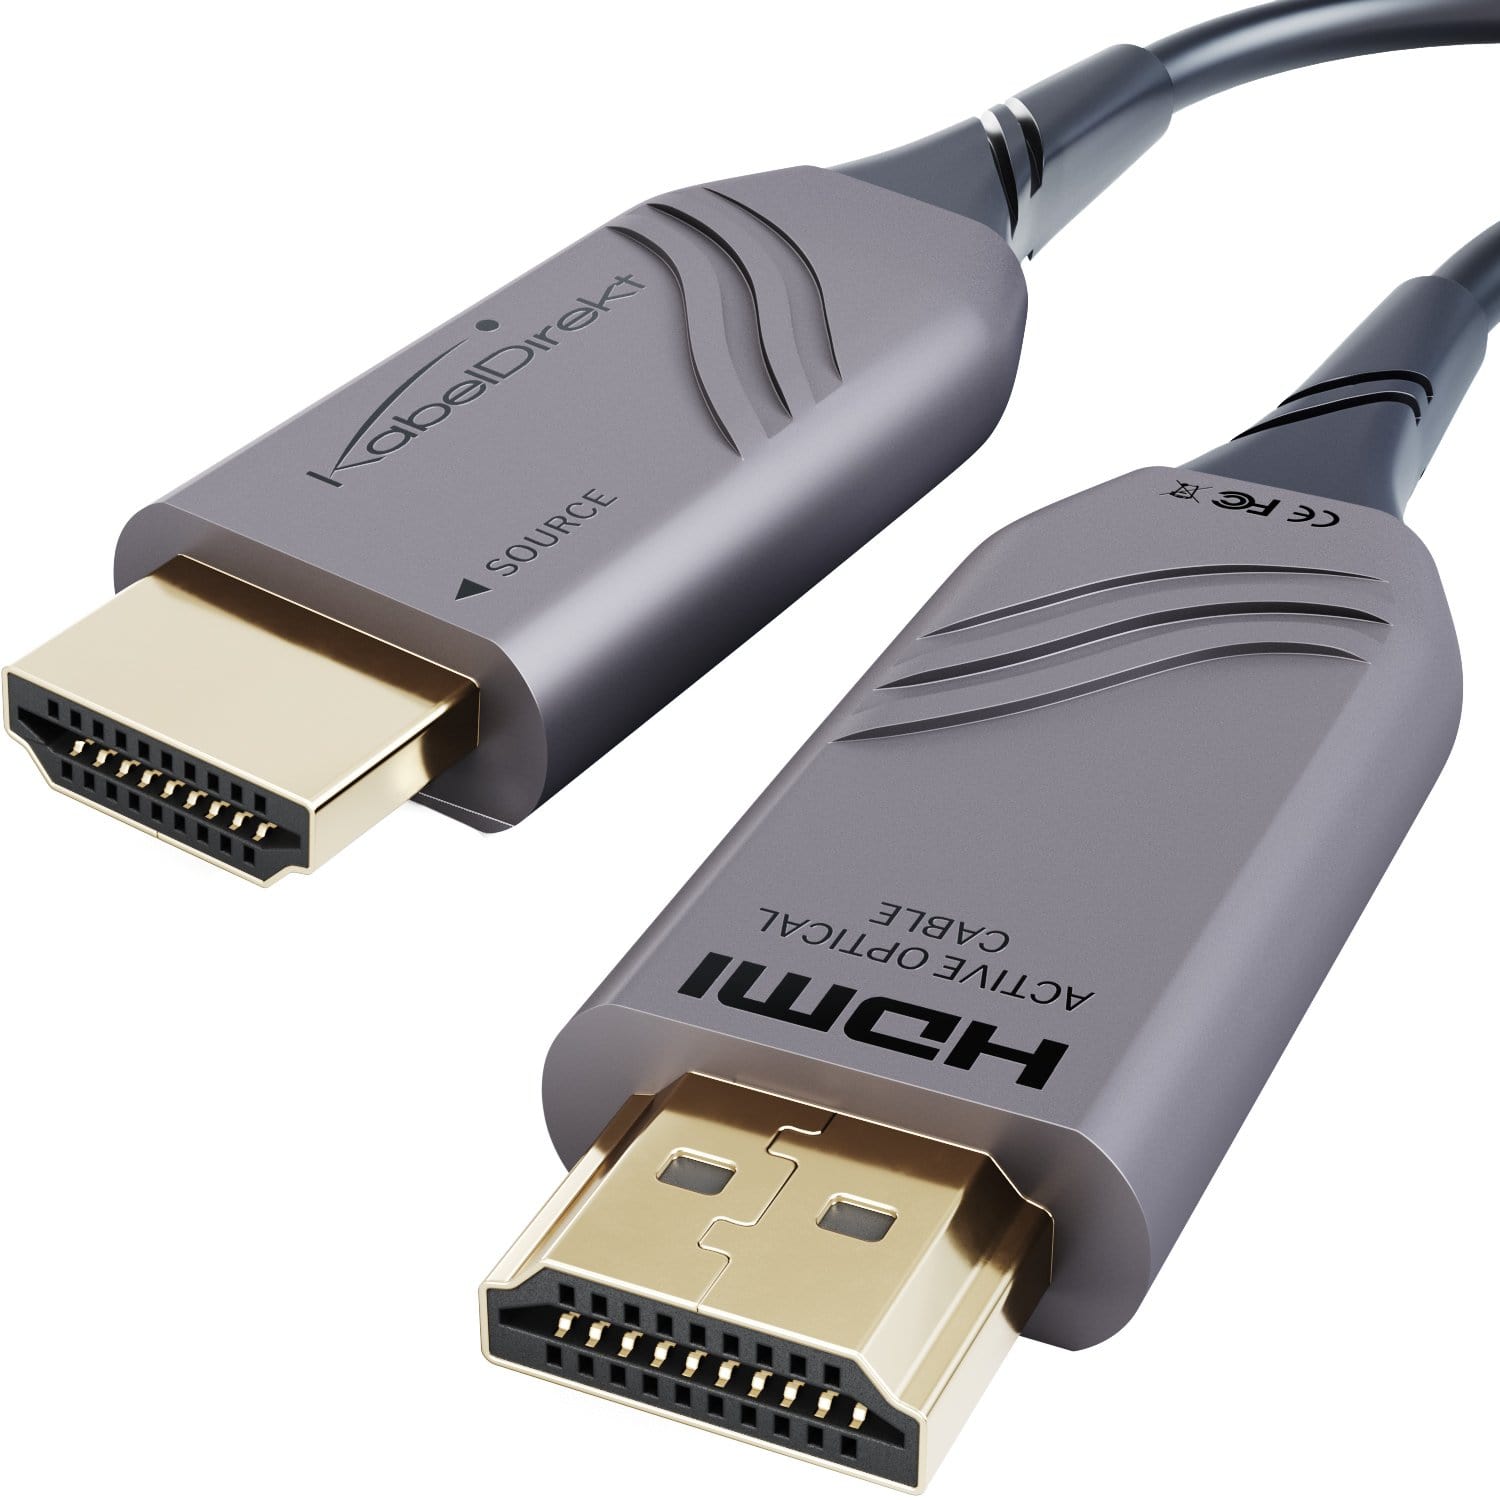 Ultra HD High Speed HDMI Cable